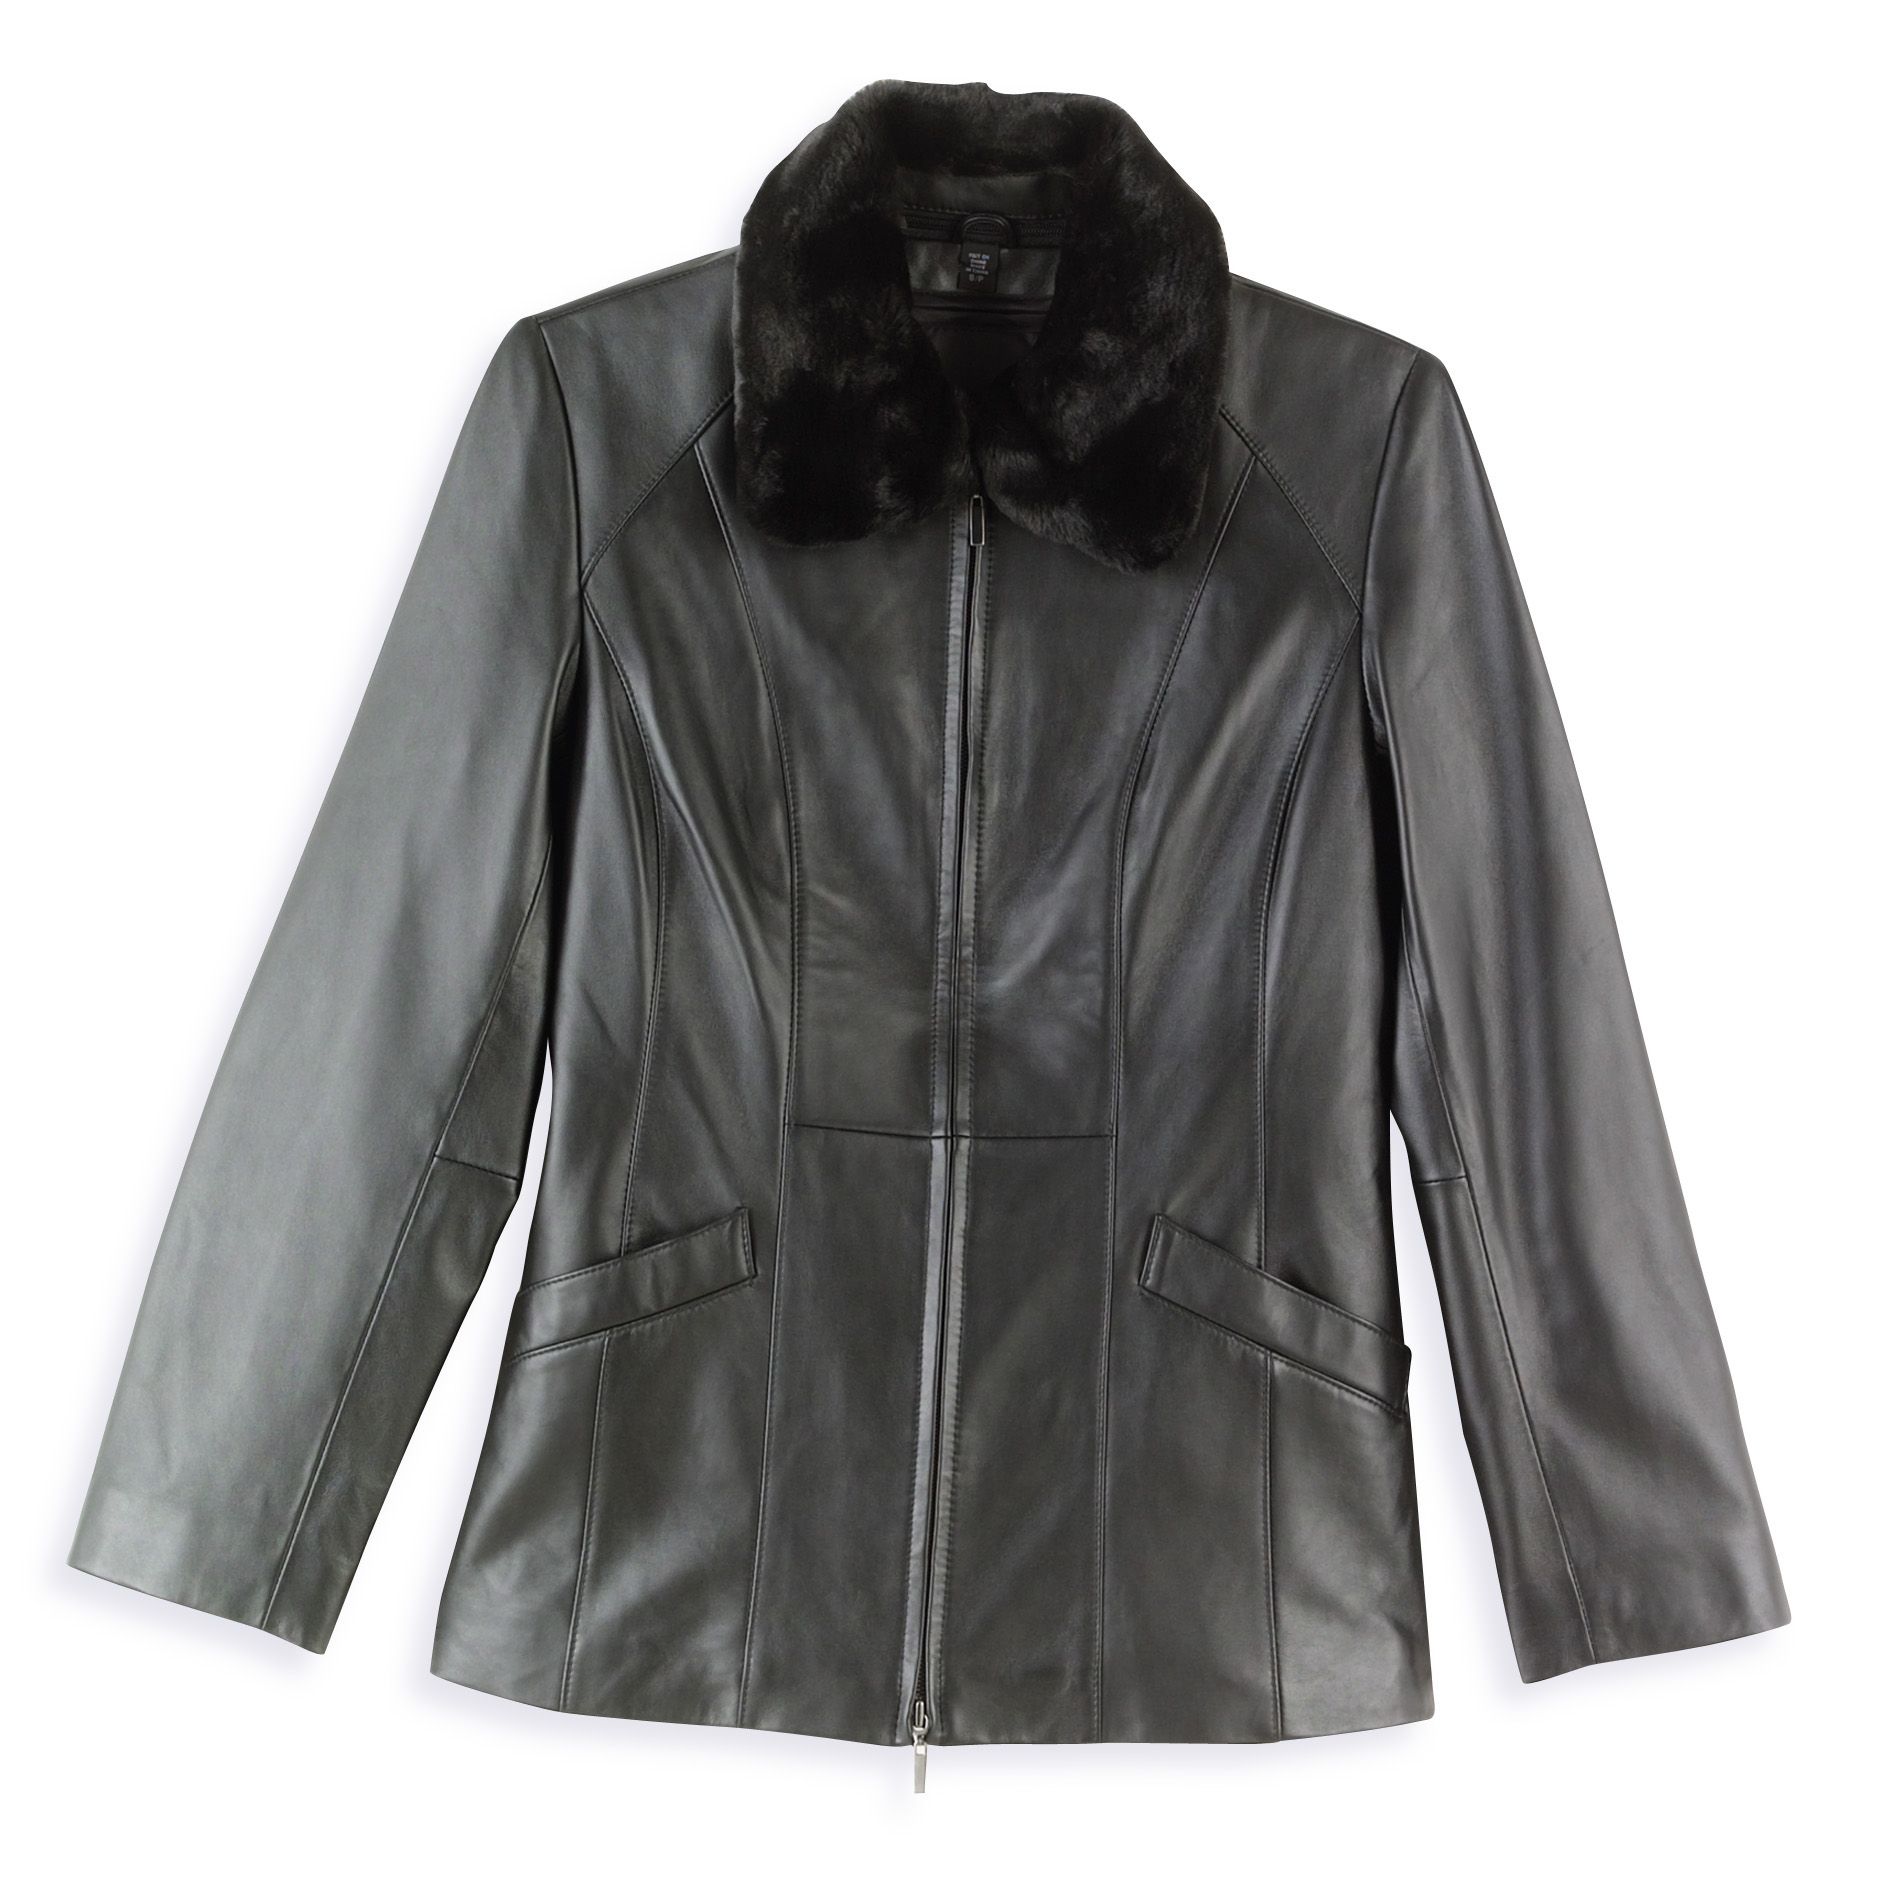 EMC Outerwear Ladies Leather Jacket with Faux Fur Collar